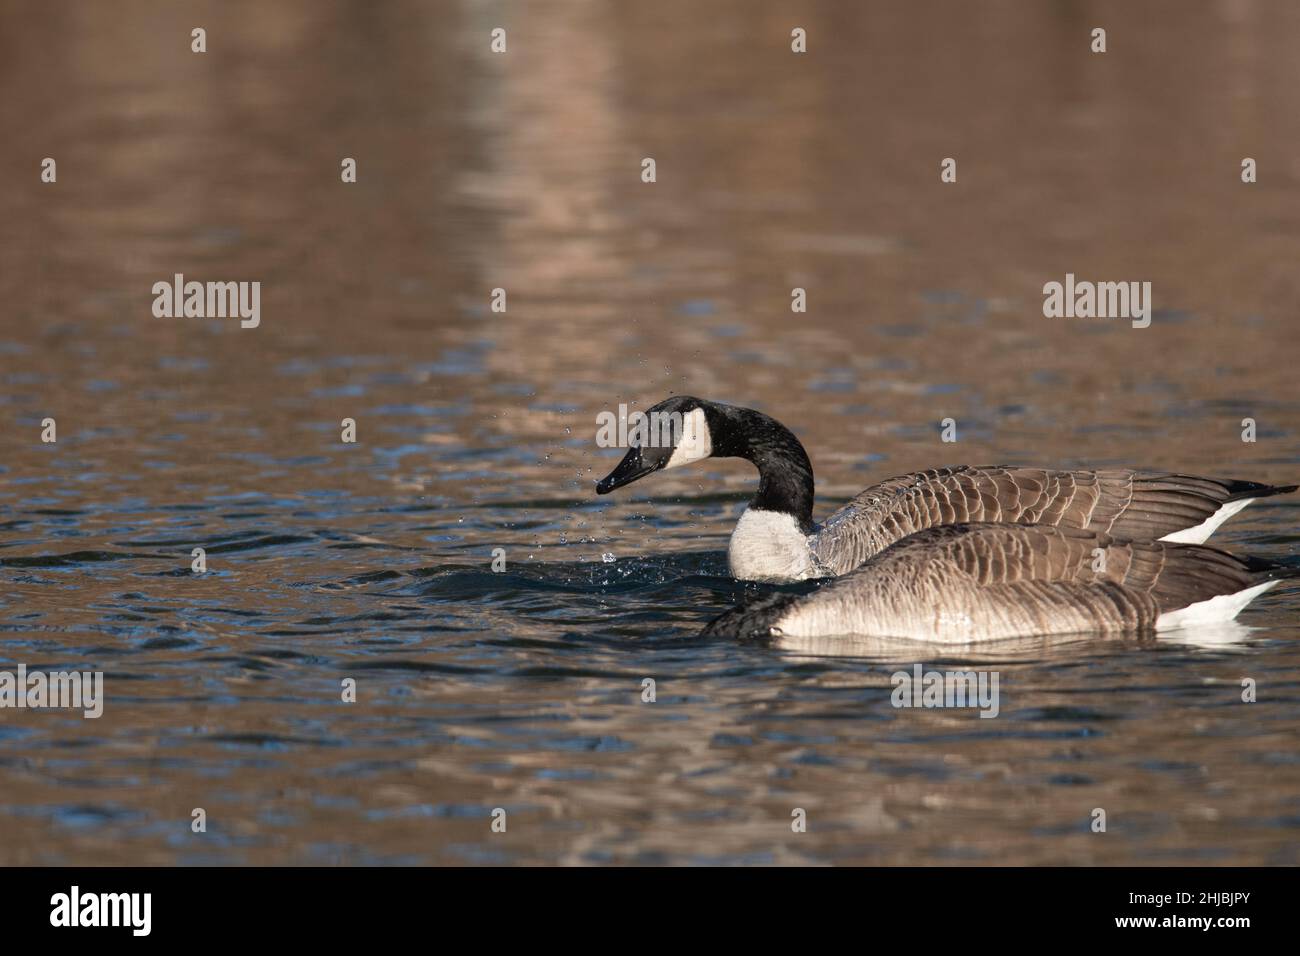 A pair of Canada Geese floating on a pond Stock Photo